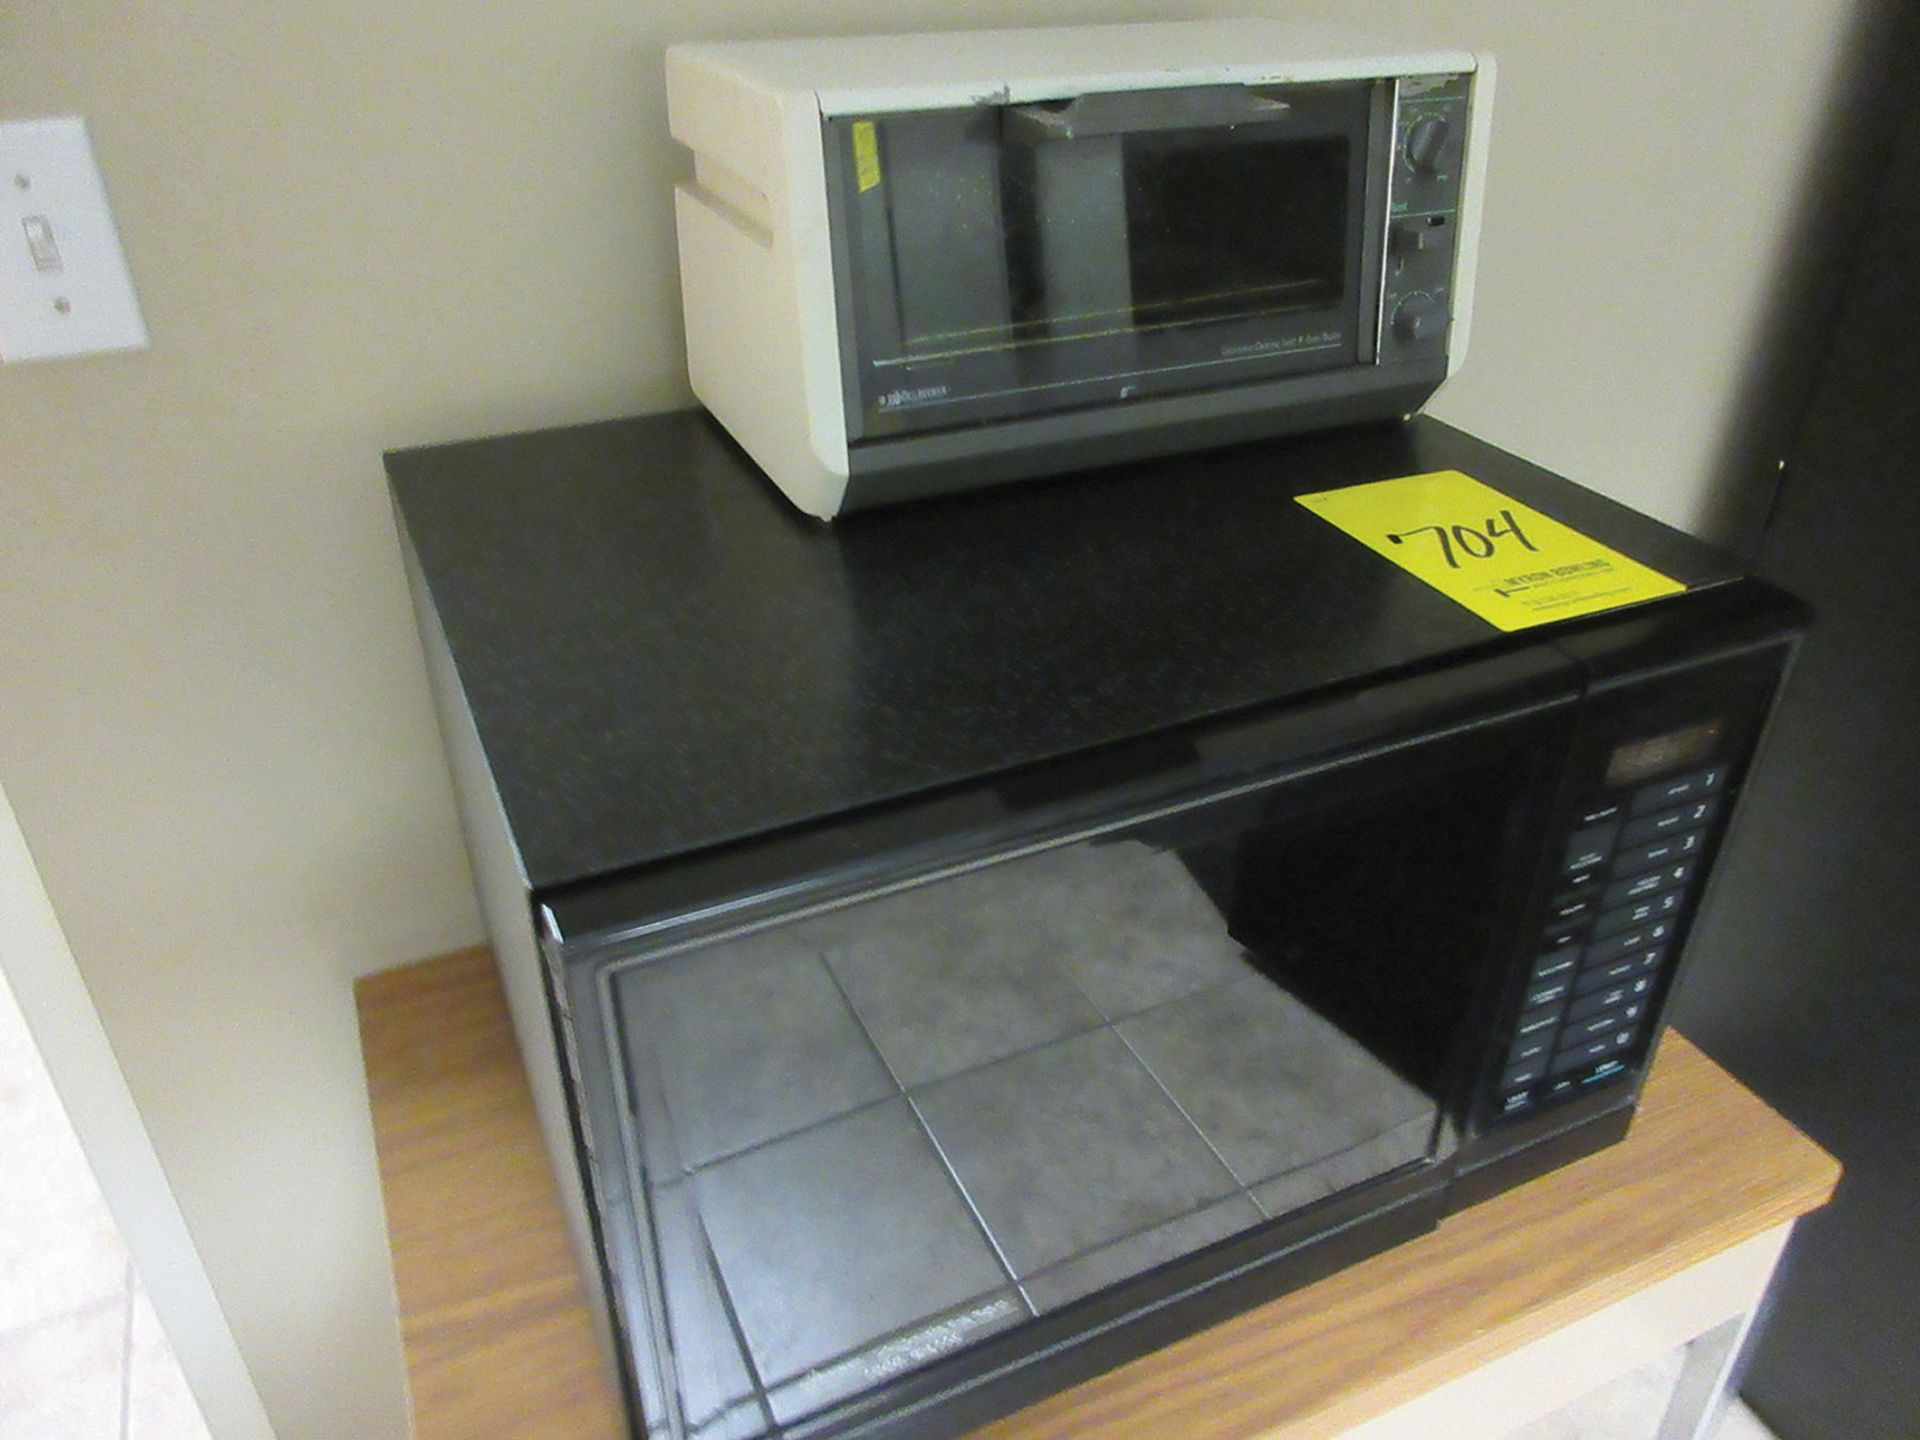 MICROWAVE, TOASTER OVEN, COFFEE MAKER, LATERAL CABINET, AND (3) 2-DOOR CABINETS - Image 2 of 2